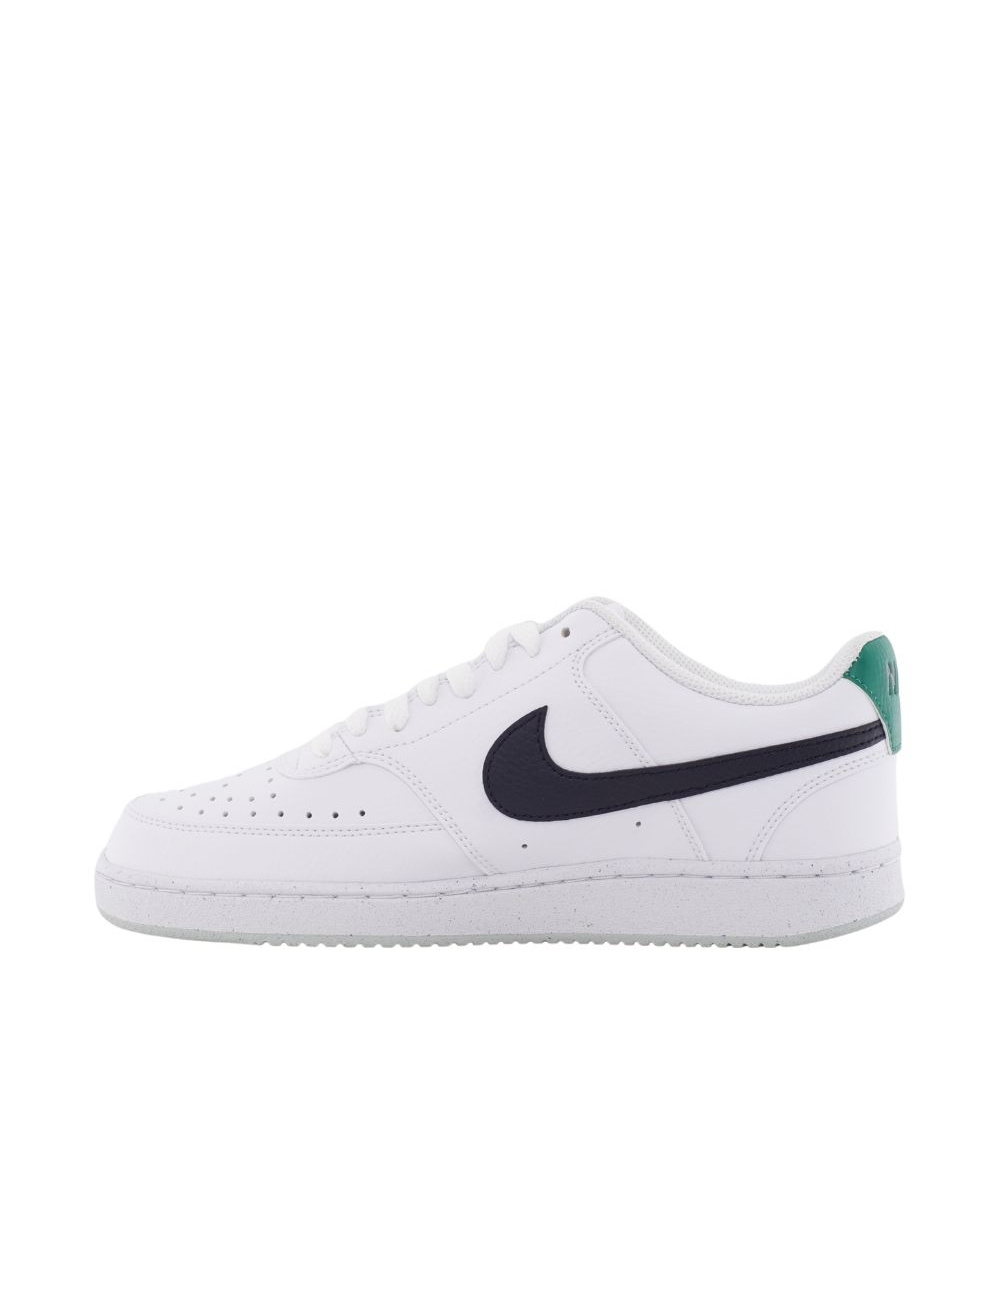 NIKE ZAPATILLA DEPORTIVA COURT VISION LOW DH2987 110 HOMBRE